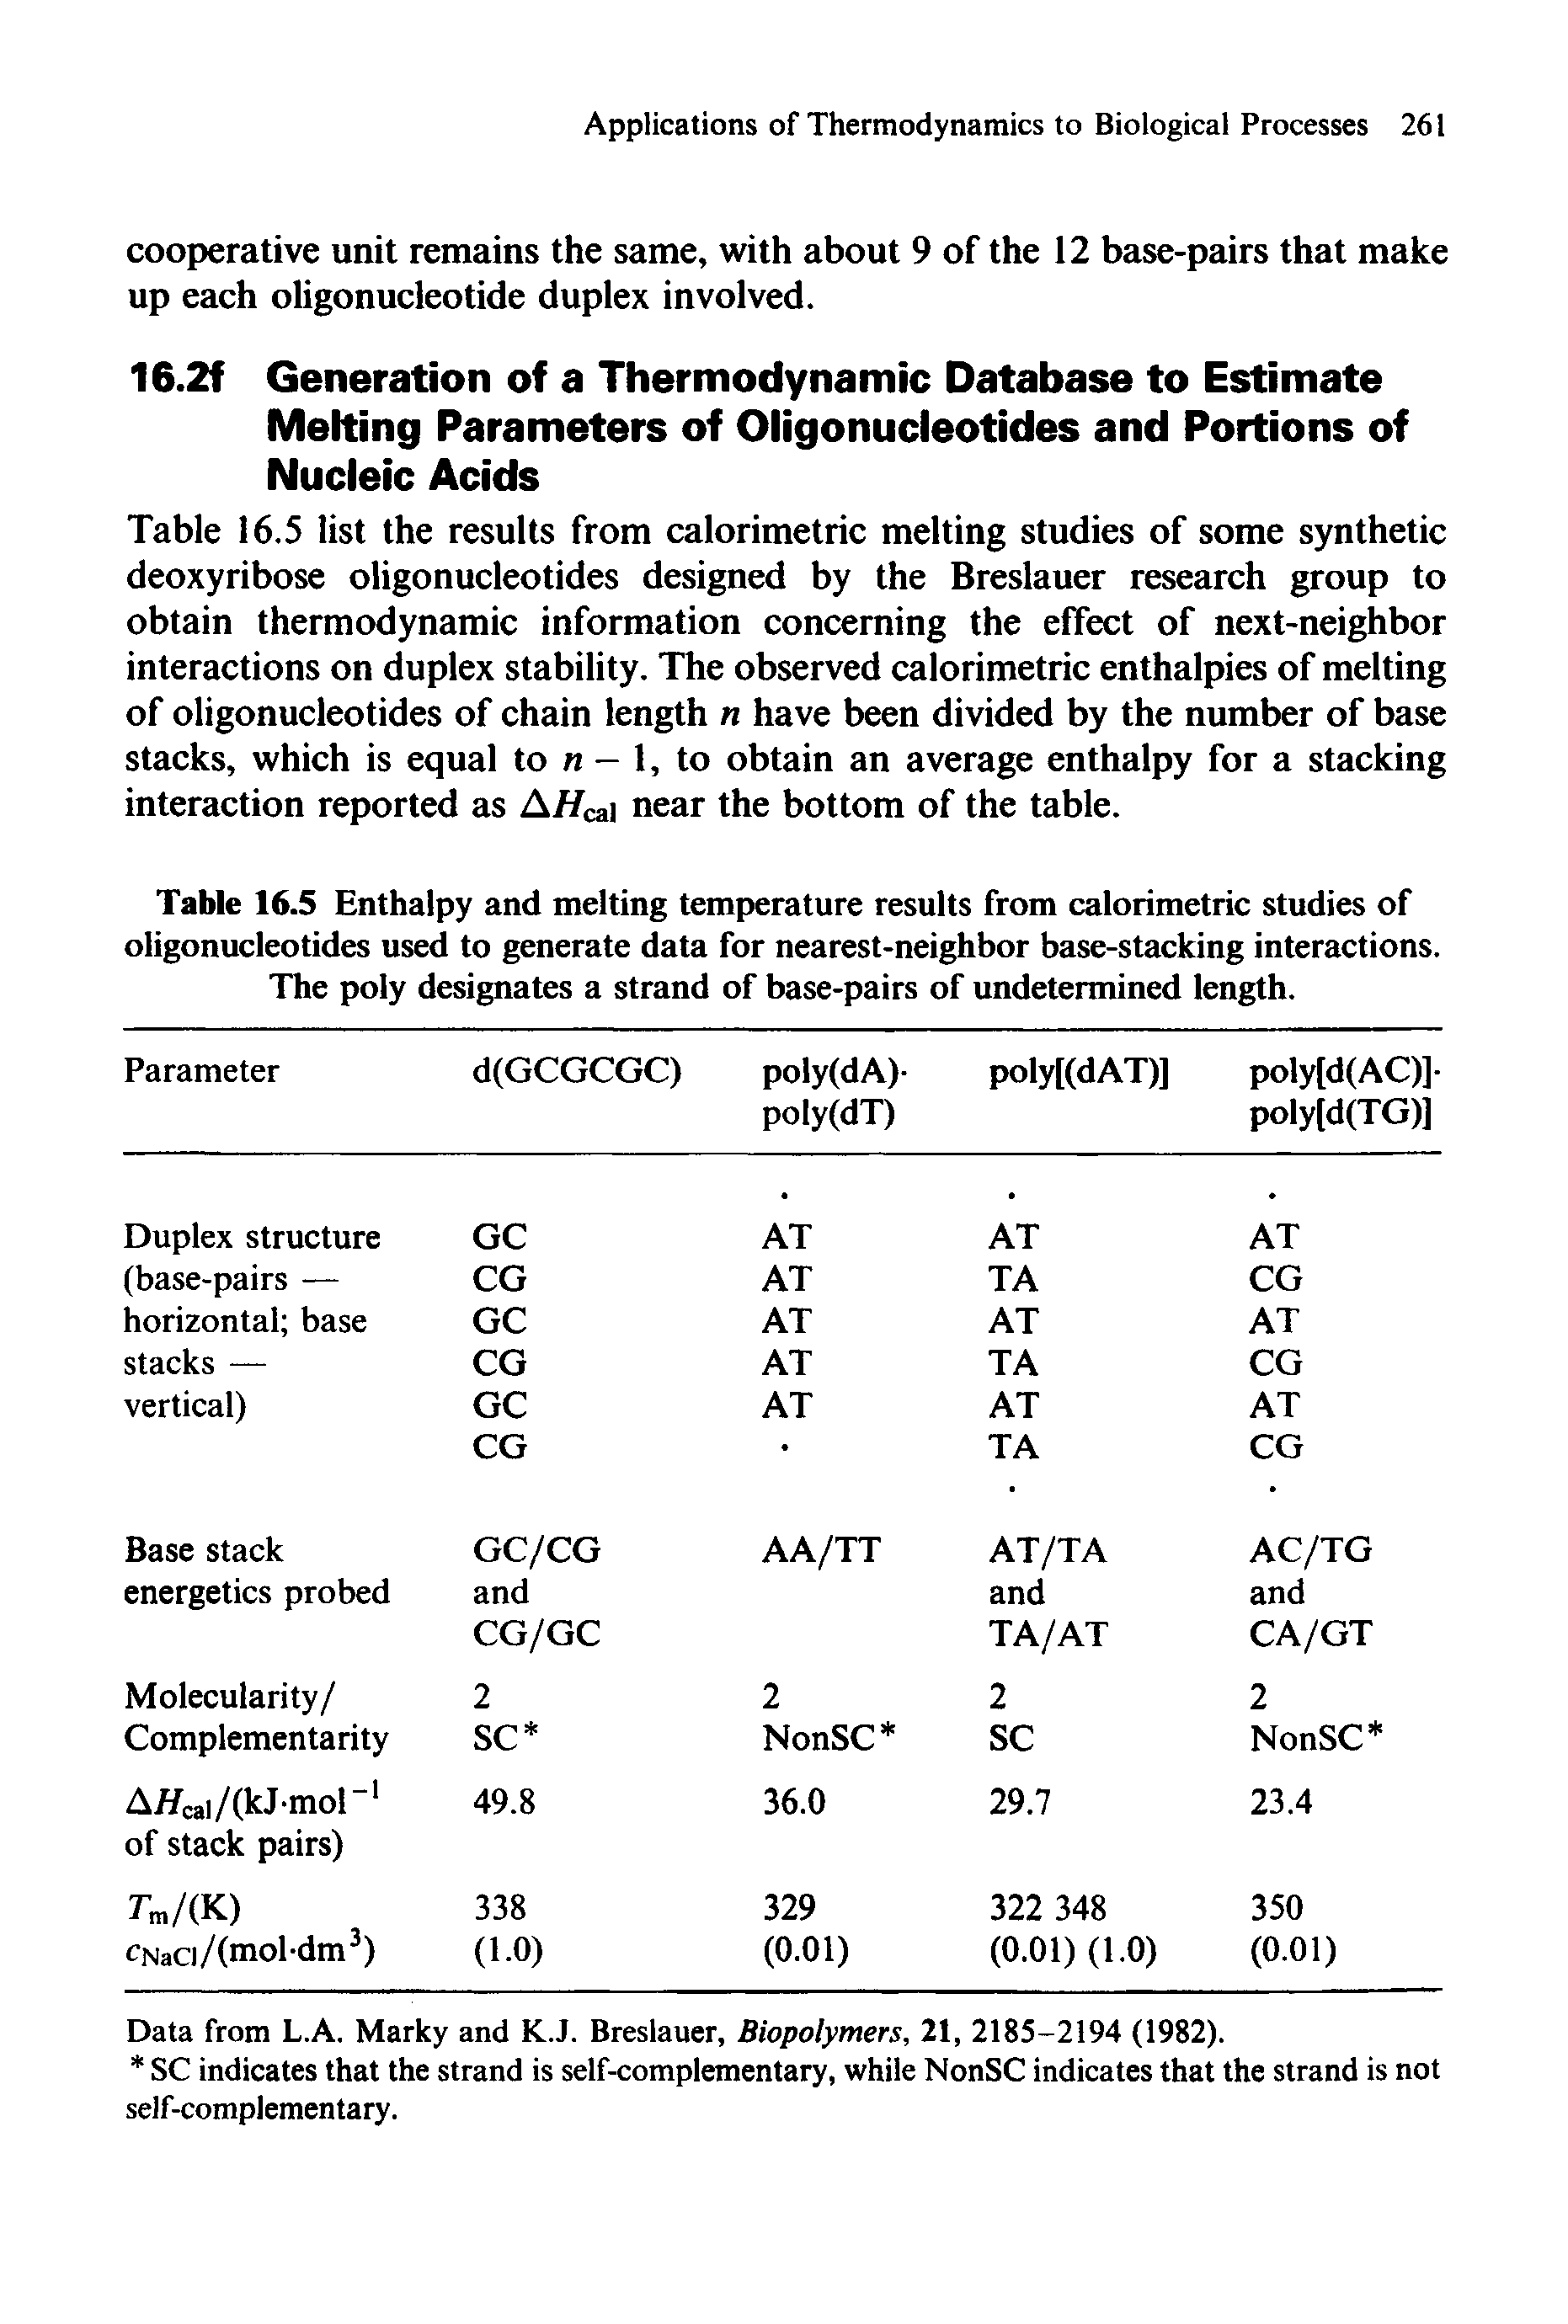 Table 16.5 Enthalpy and melting temperature results from calorimetric studies of oligonucleotides used to generate data for nearest-neighbor base-stacking interactions. The poly designates a strand of base-pairs of undetermined length.